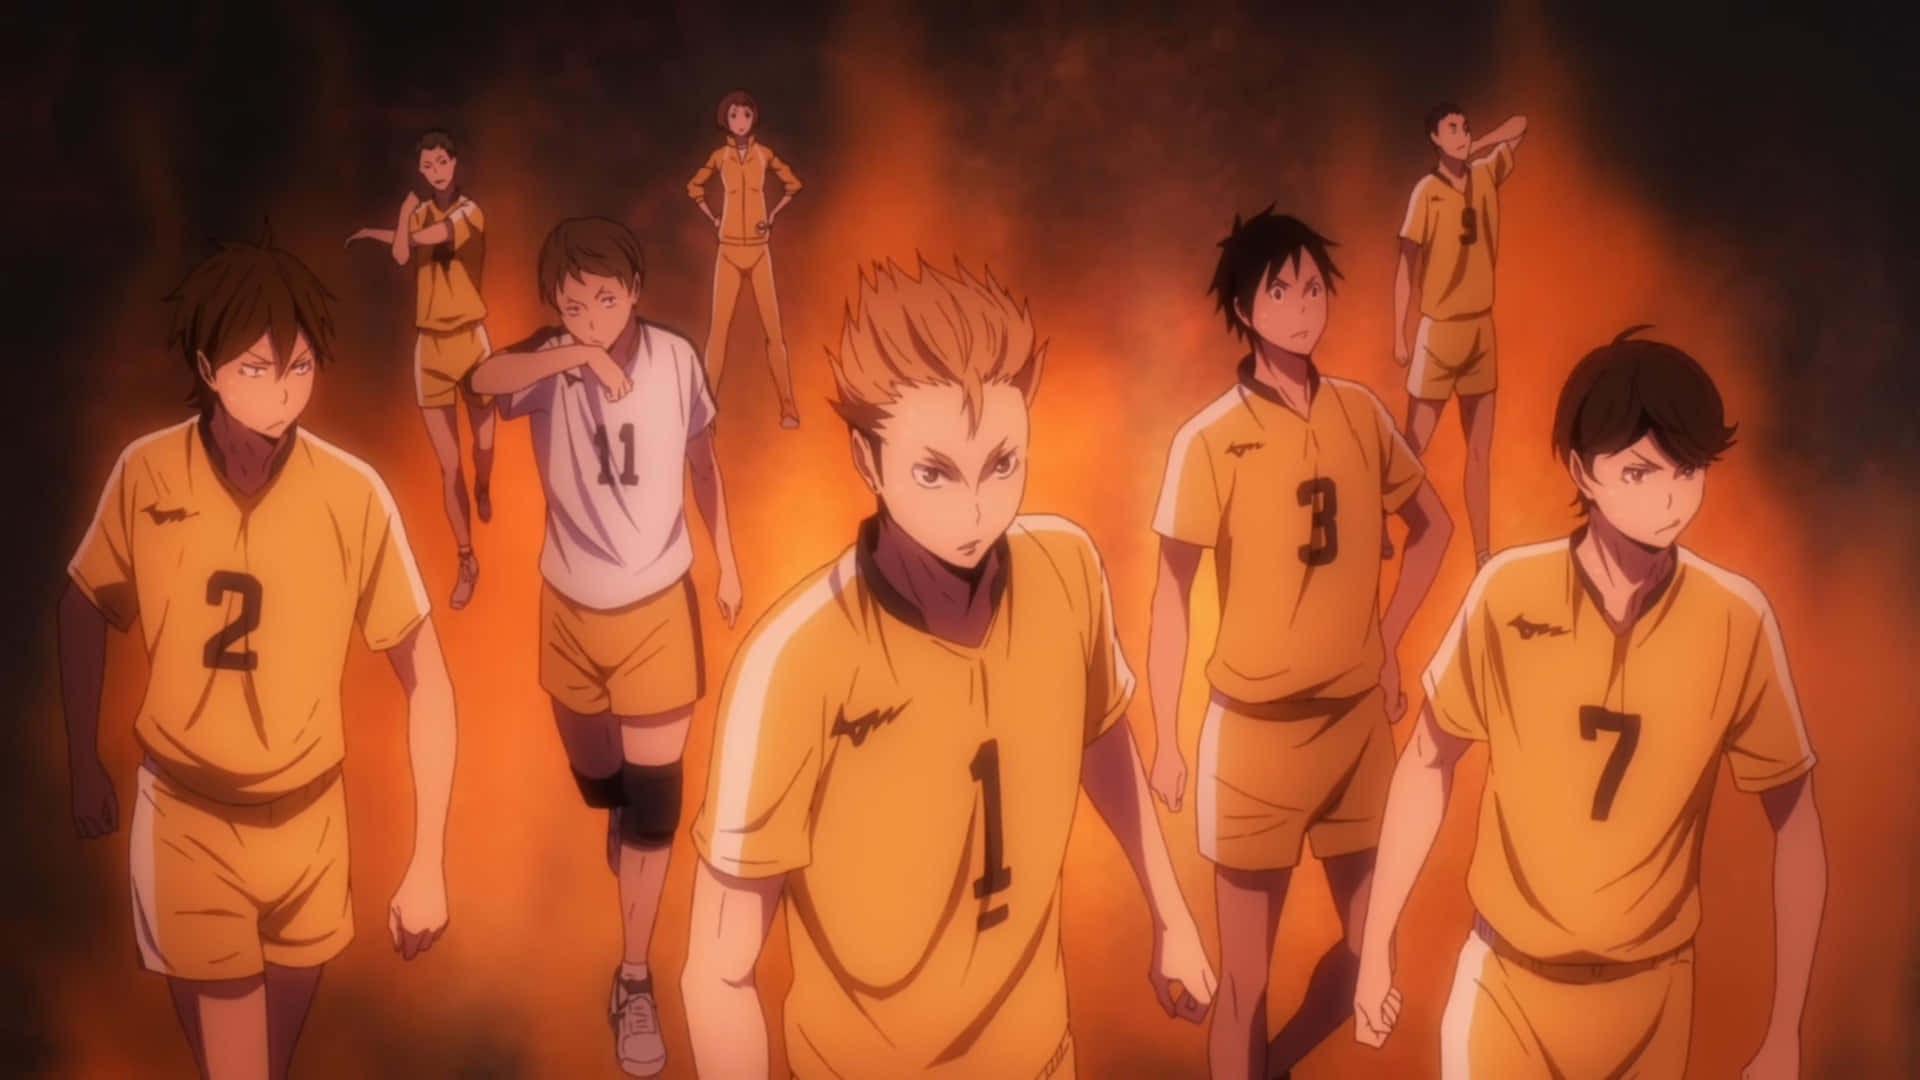 Johzenji High's Volleyball Team in Action Wallpaper